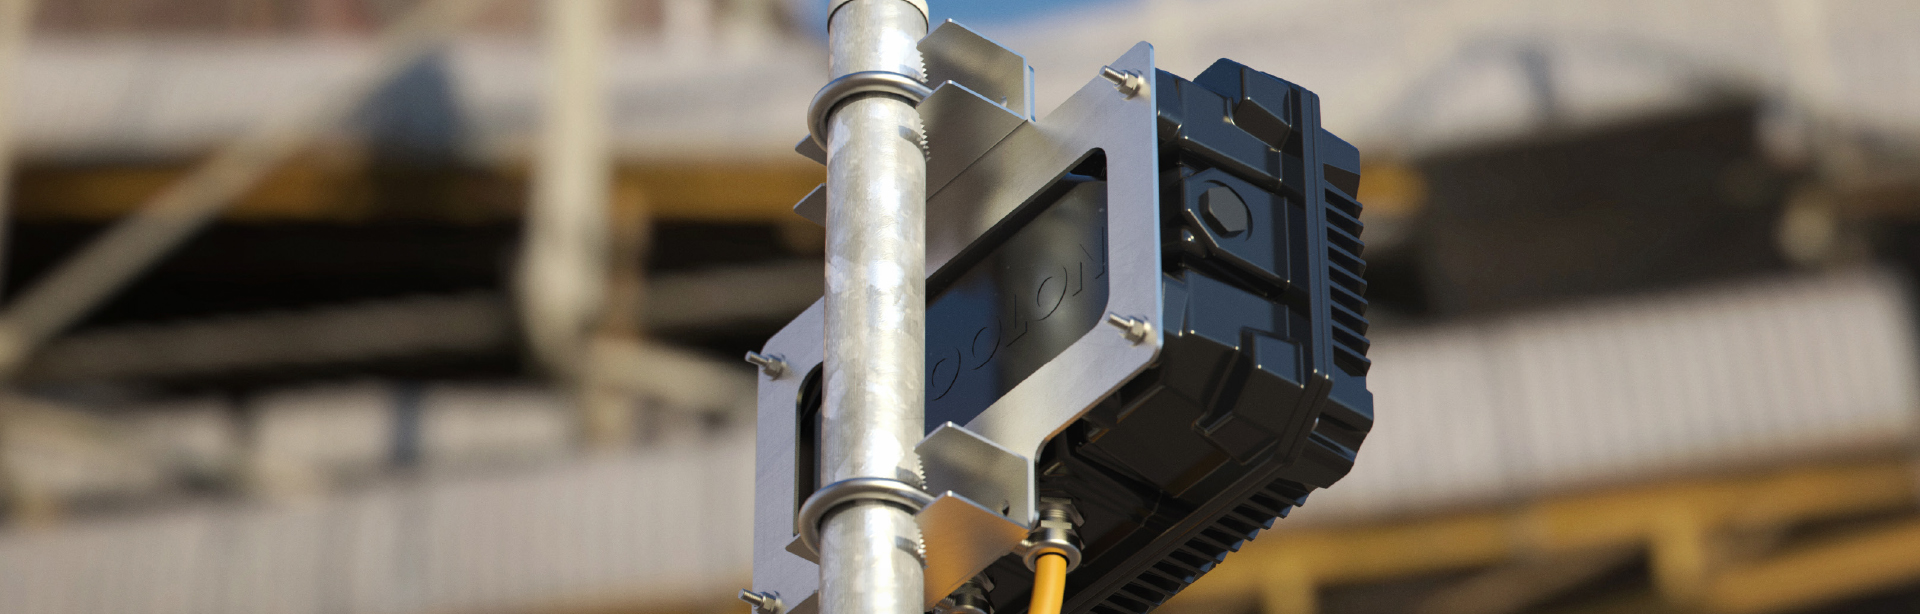 The Bulkhead Pole Mounting Bracket is specifically designed for mounting Bulkhead luminaire on a variety of circular poles that are widely used in the industry.